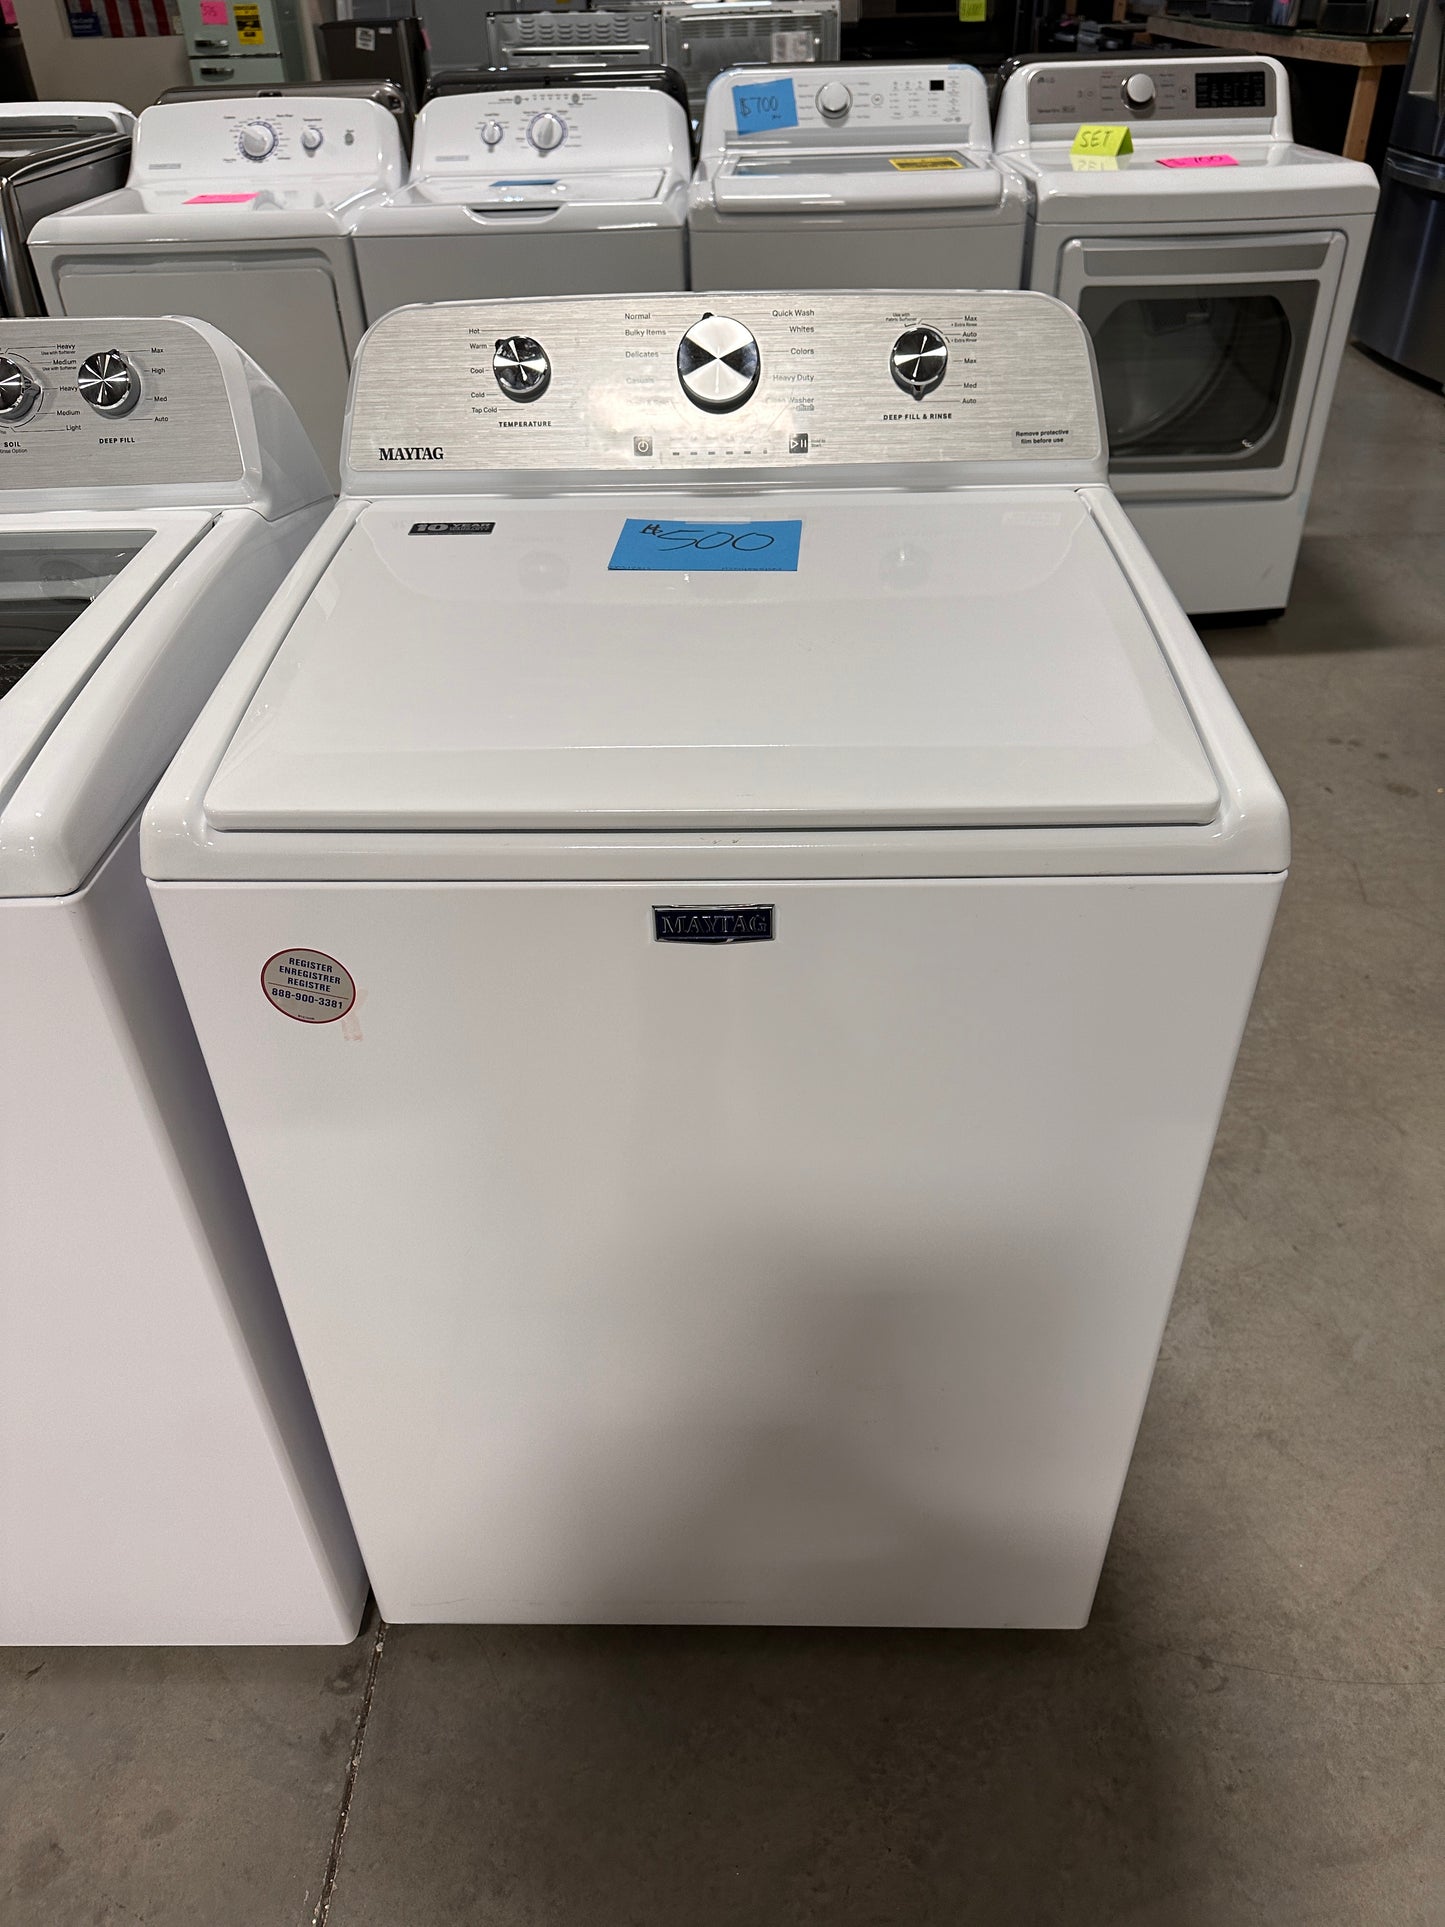 NEW TOP LOAD WASHER WITH DEEP FILL - WAS12817